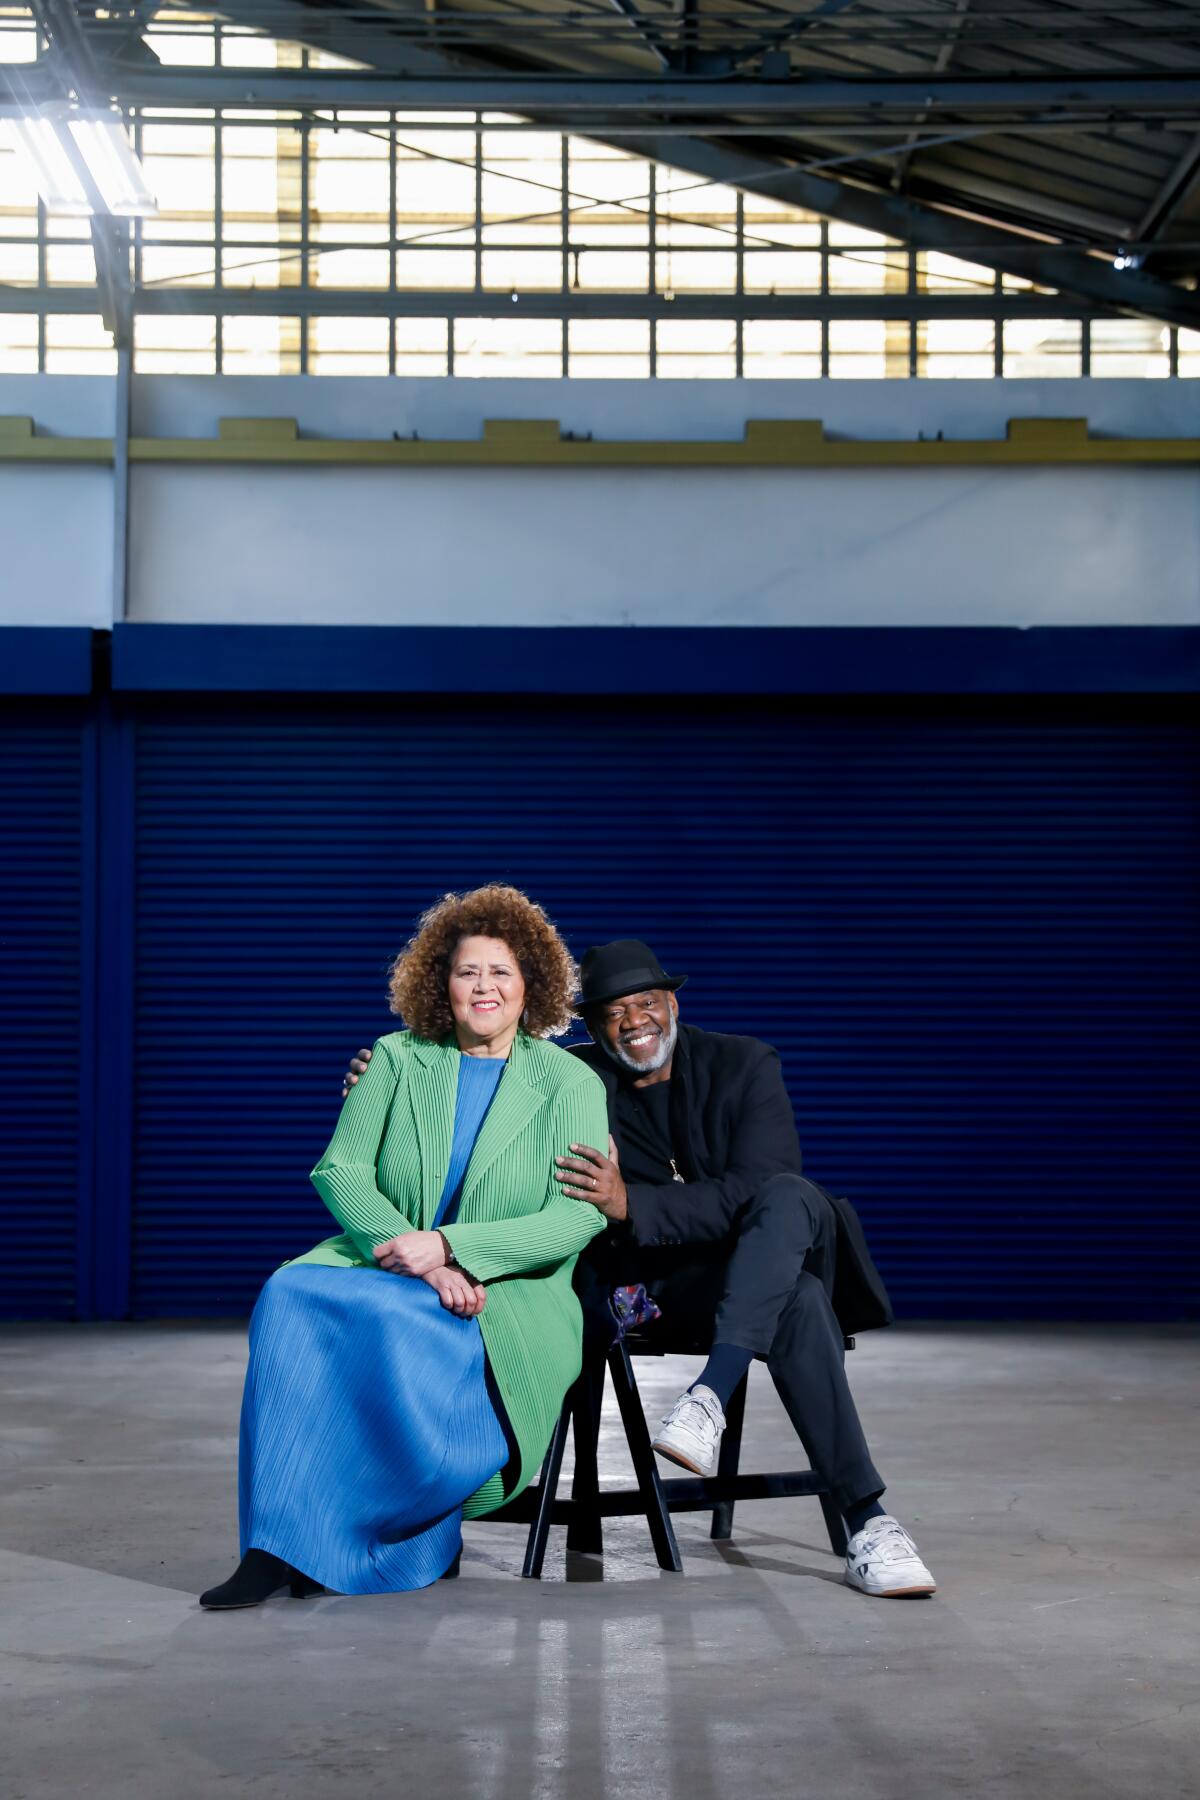 Anna Deavere Smith, in blue dress and green coat, shares a bench with Gregg Daniel, in black, in a bare industrial space